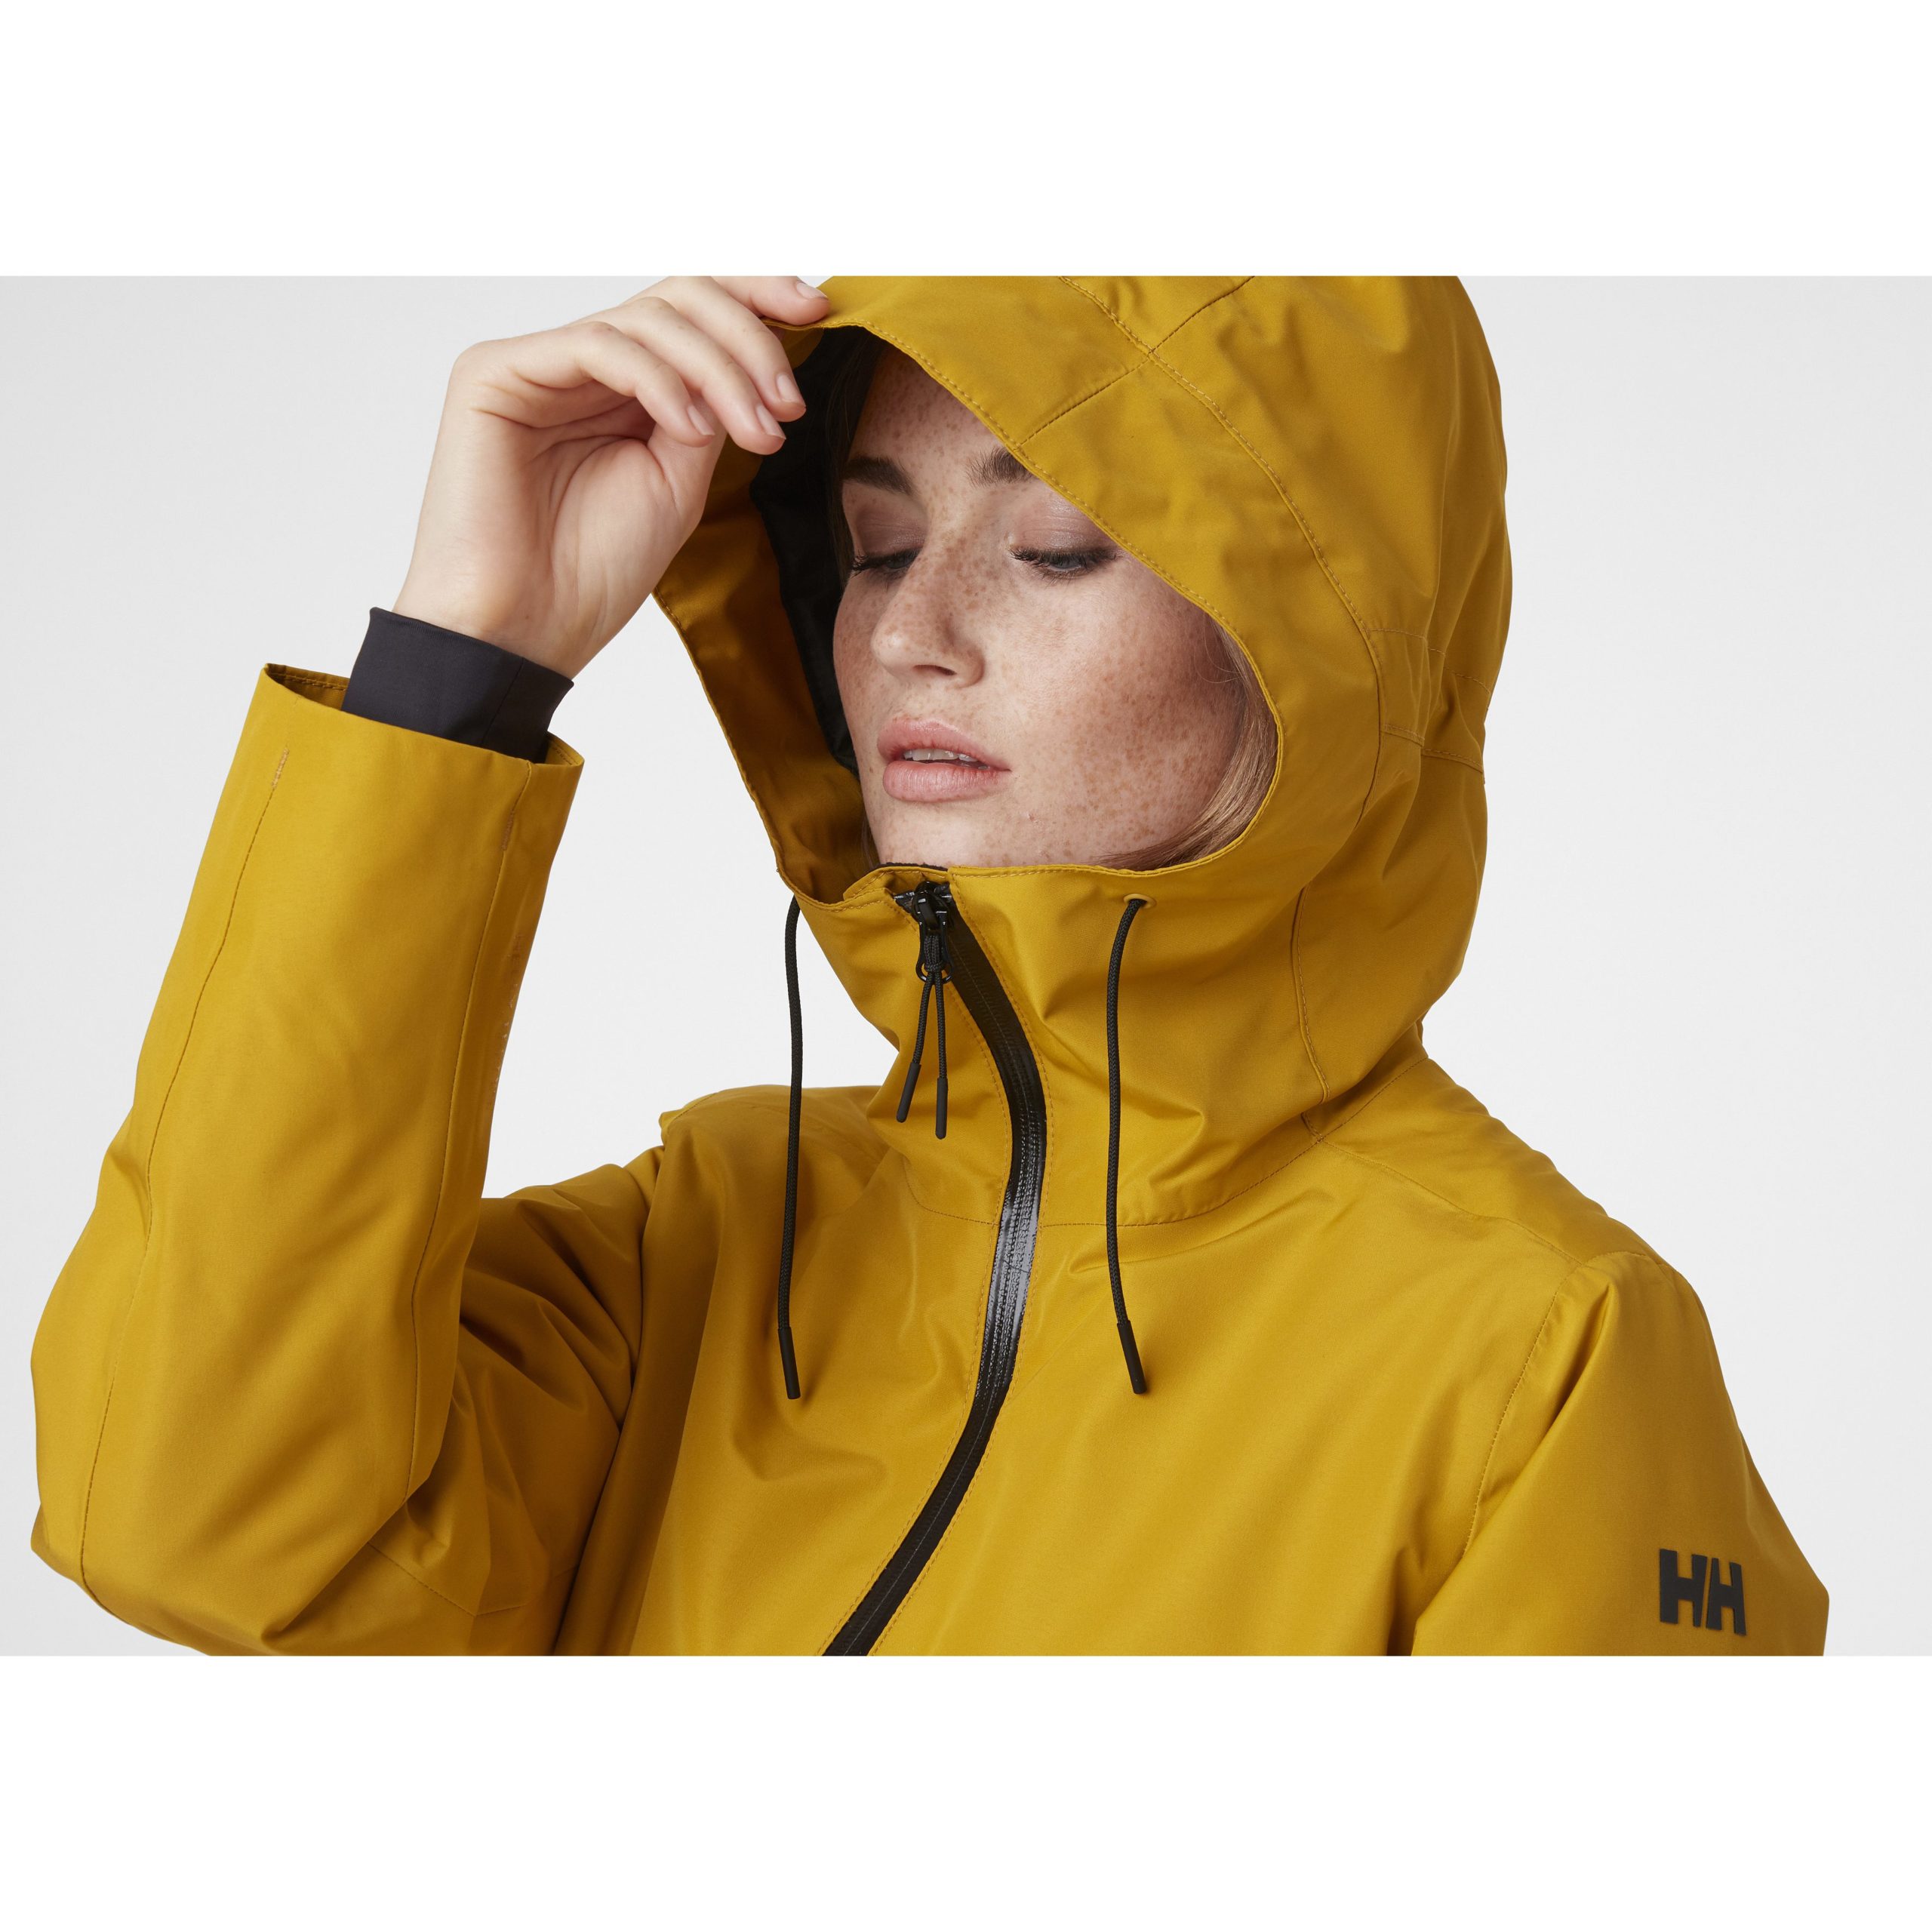 BRAND NEW WITH TAGS SAVE £45 Helly Hansen Helly Hansen Aspire Jacket small 